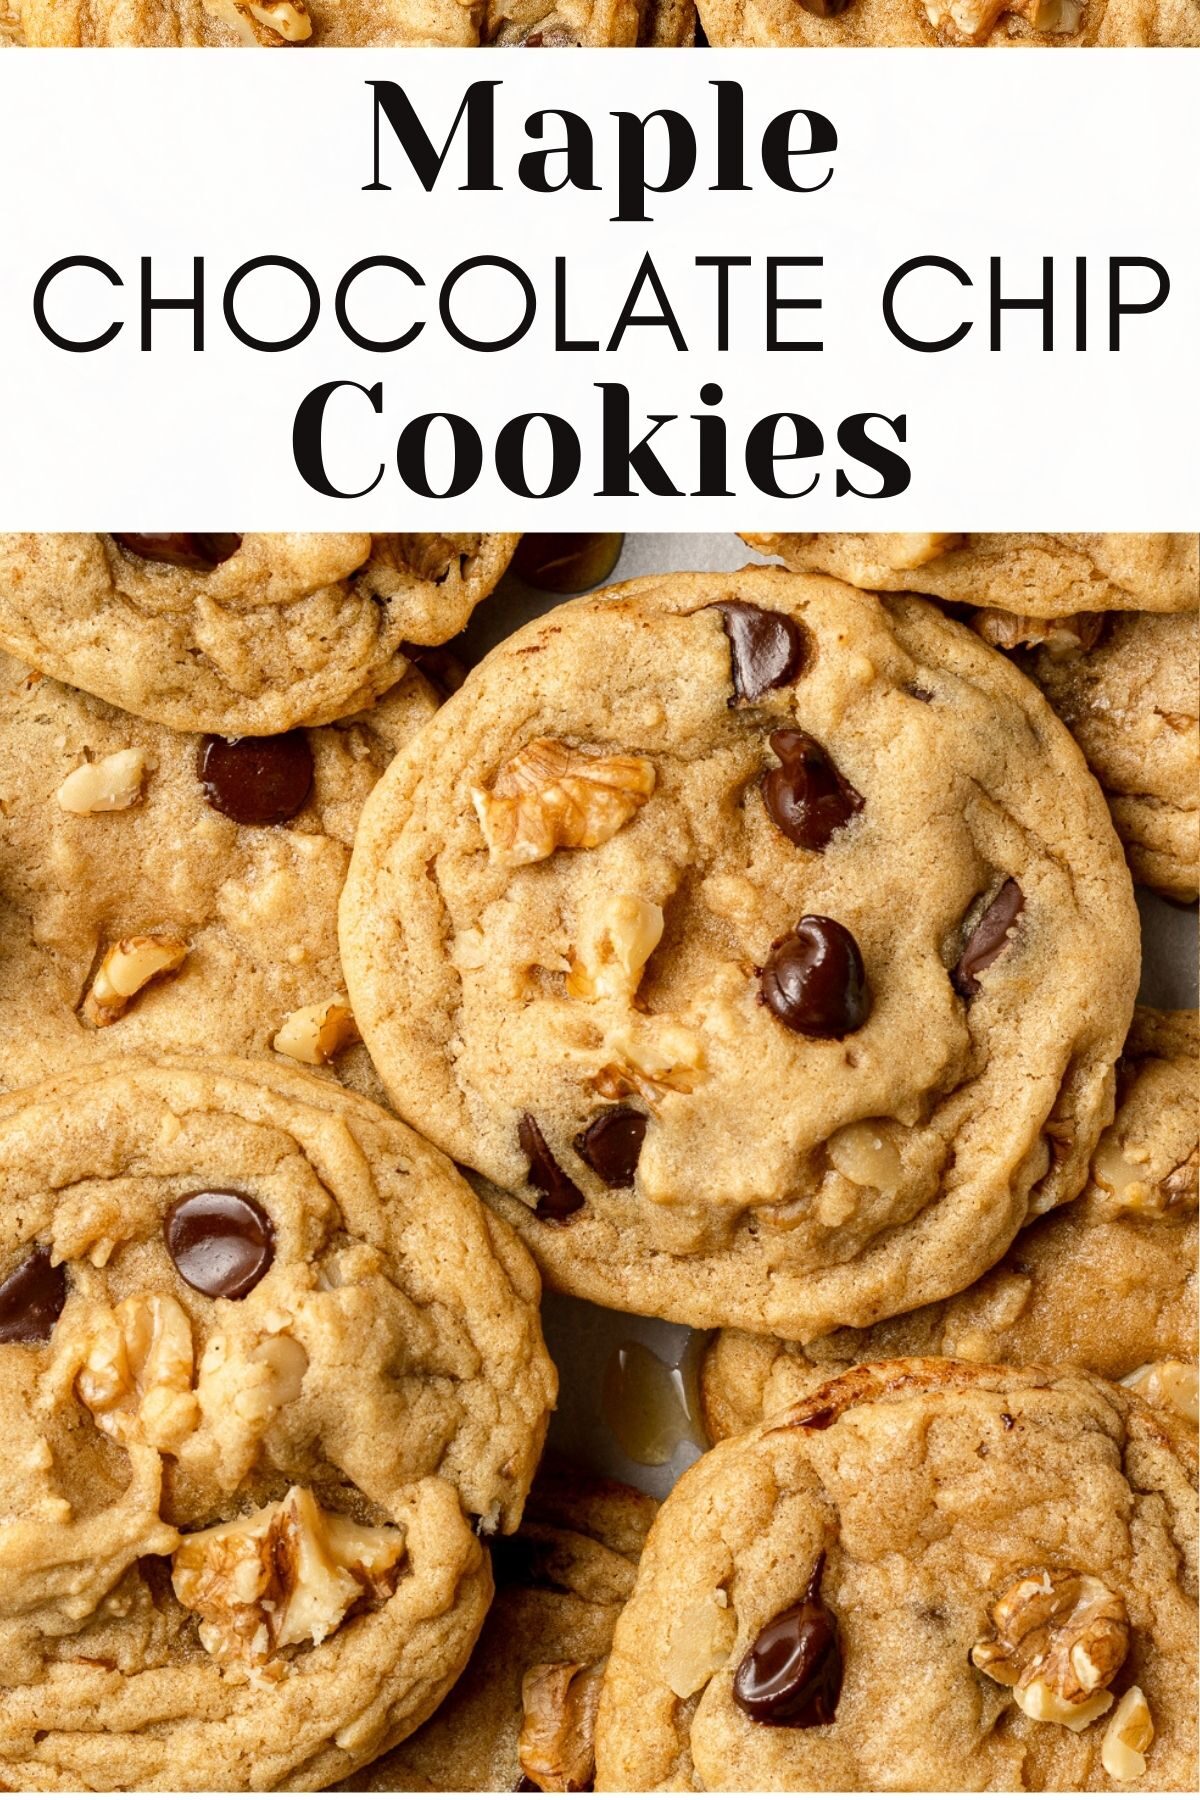 maple chocolate chip cookies in a pile with text overlay